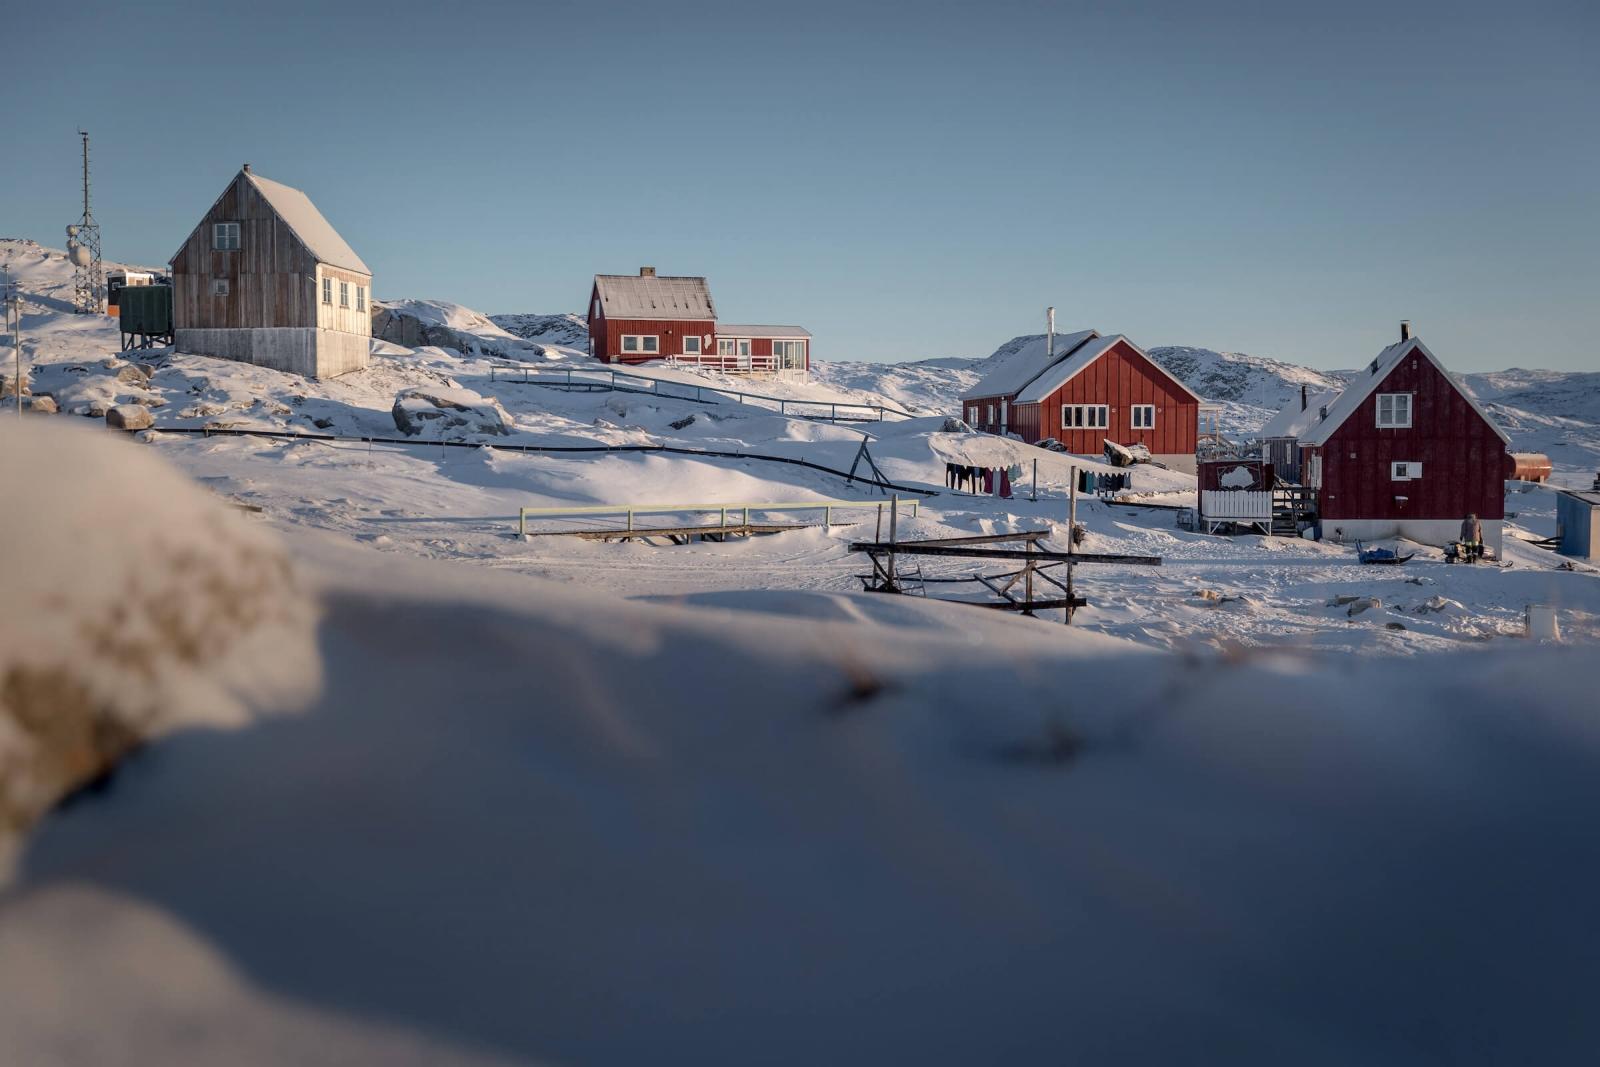 Hotel Nordlys in the village Oqaatsut in Greenland. Photo by Mads Pihl - Visit Greenland